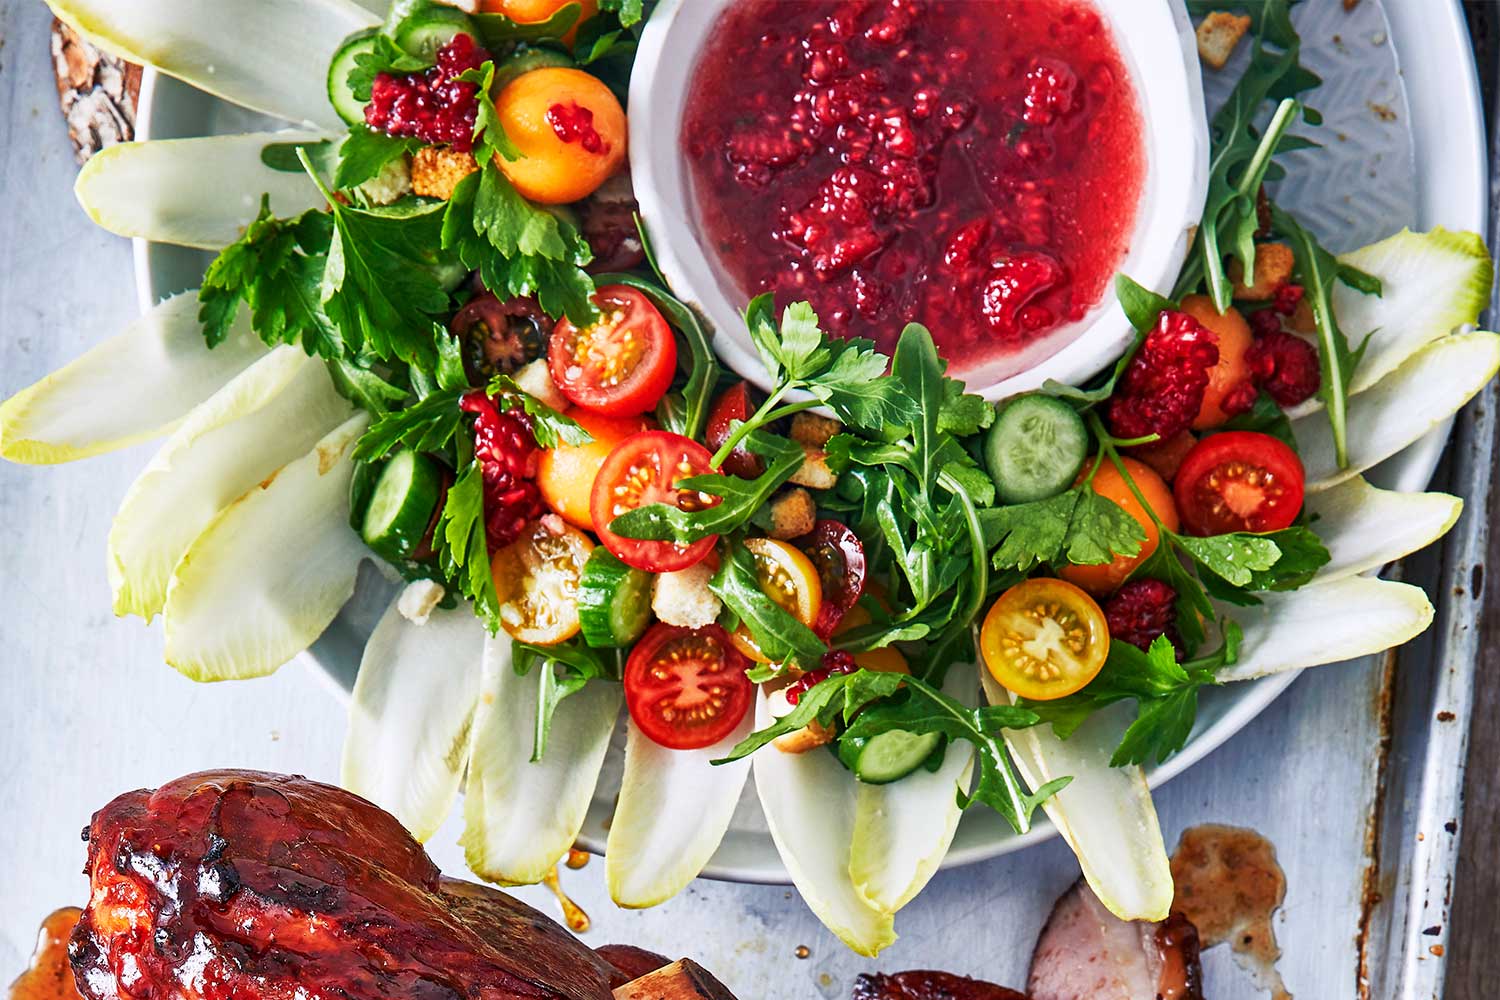 Cranberry and lime glazed Christmas ham and wreath salad